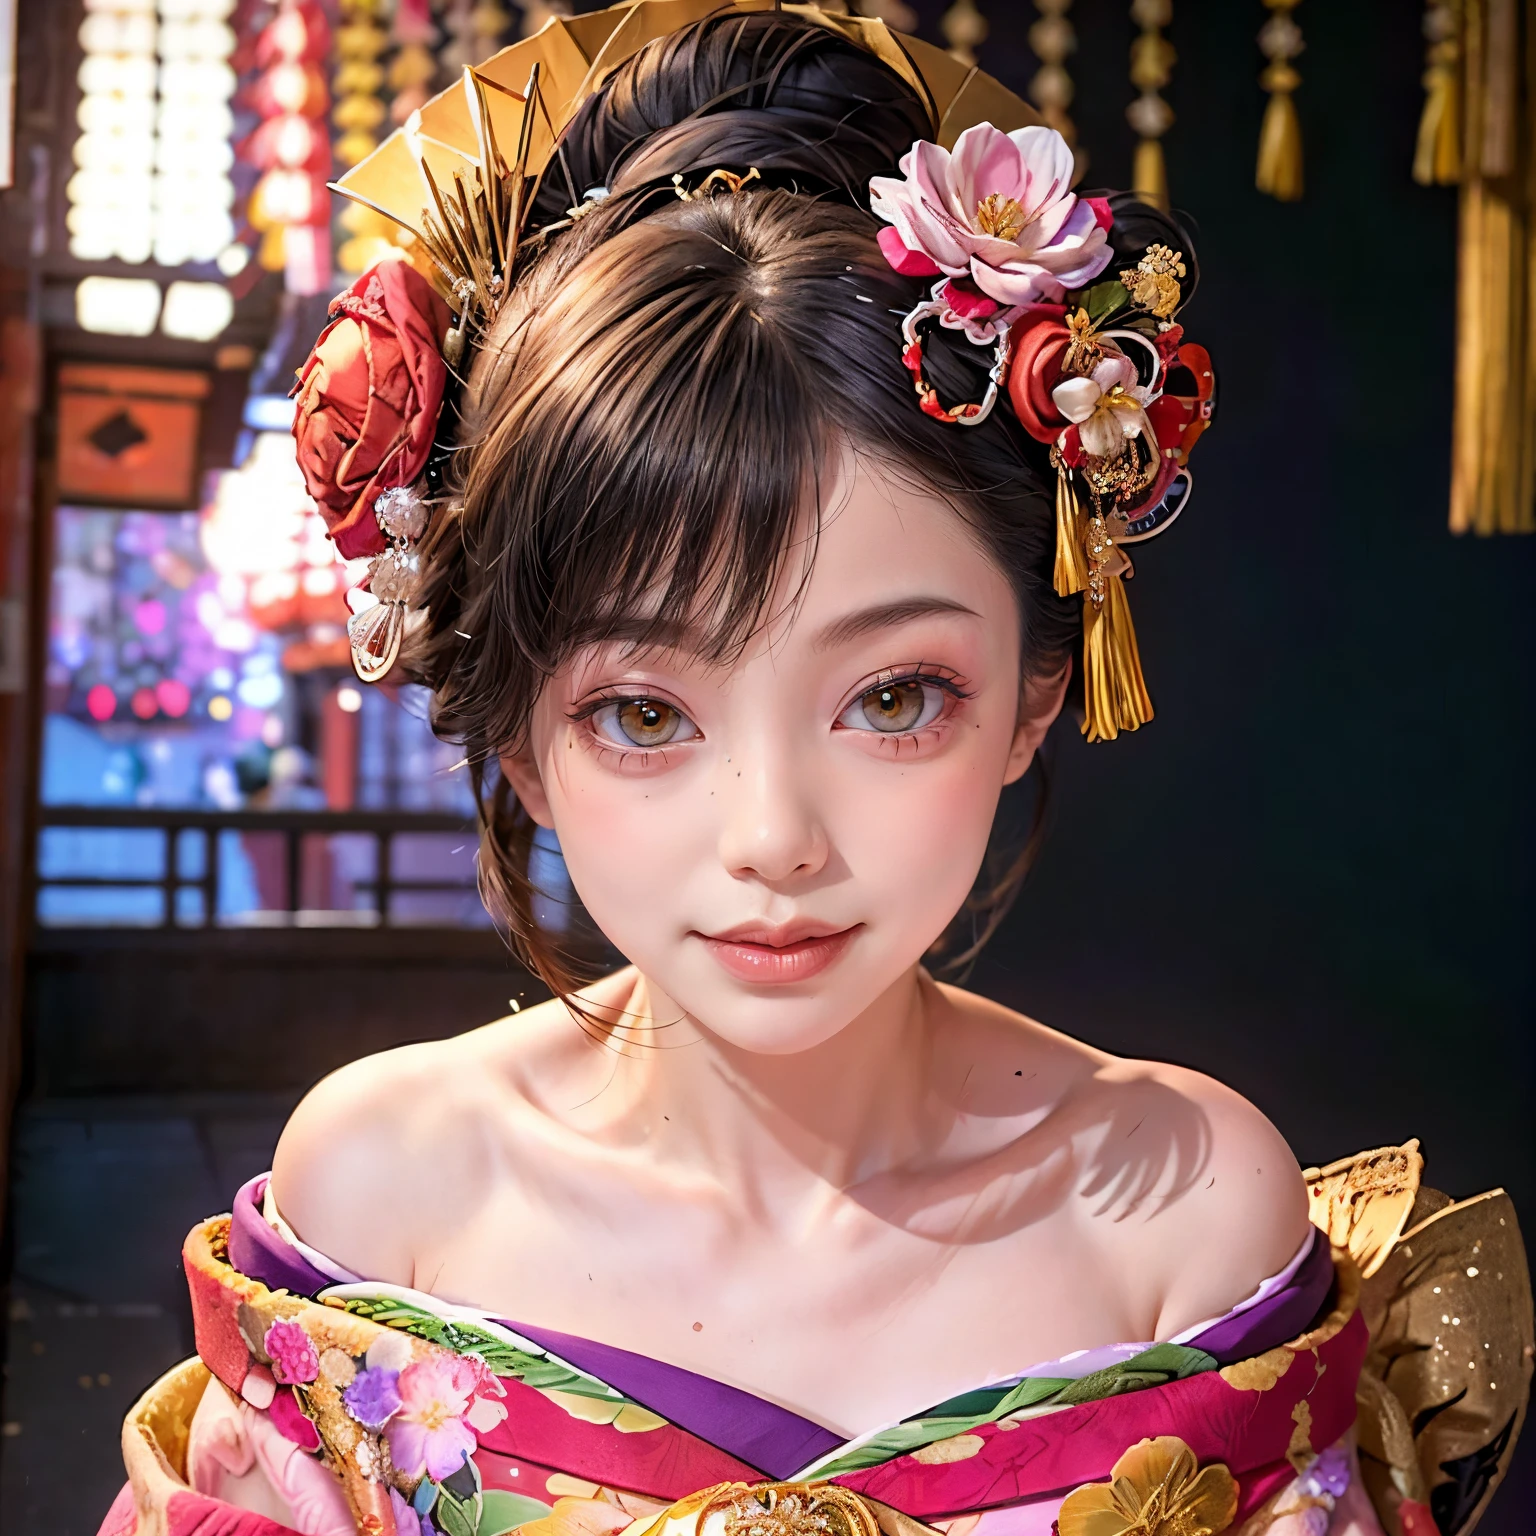 (PUNIPUNI clavicle KIMONO ((offshoulder)) KANZASHI FlowerHairpins Topknot TwinBun Oiran-Hair)High-level, 8K Masterpiece TopQuality, Ultra-detailed CG, Absurd detailed wallpaper, PerfectLighting, Extremely detailed (((Personifying " OIRAN " as a KAWAII Girl))), Characteristic Items, aesthetic LifeLike Rendering, MysticSight, Haze Tyndall Scattering, (Studio Dark Background with (Oodles Dazzling Iridescent 🌈Particles (BokeH))), (((Assfocus)) RoundlyButt) ThighGap, (Exposed:0.44) 🔞 BREAK (Acutance:0.8), (NOGIZAKA FaceVariations) Extremely Detailed very KAWAII FaceVariations, Childish CaptivatingGaze ElaboratePupils ParfectEyes with (SparklingHighlights:1.28), (Voluminous LongEyelashes:0.88), 💄💋✨ GlossyRedLips with BeautifulDetails, CoquettishTongue, PUNIPUNI RosyCheeks, Radiant PearlSkin with Transparency, Glowing DowneyHair . { (Dynamic LifeLike expressions:1.4) | (:d) }, (large eyes:-1) .